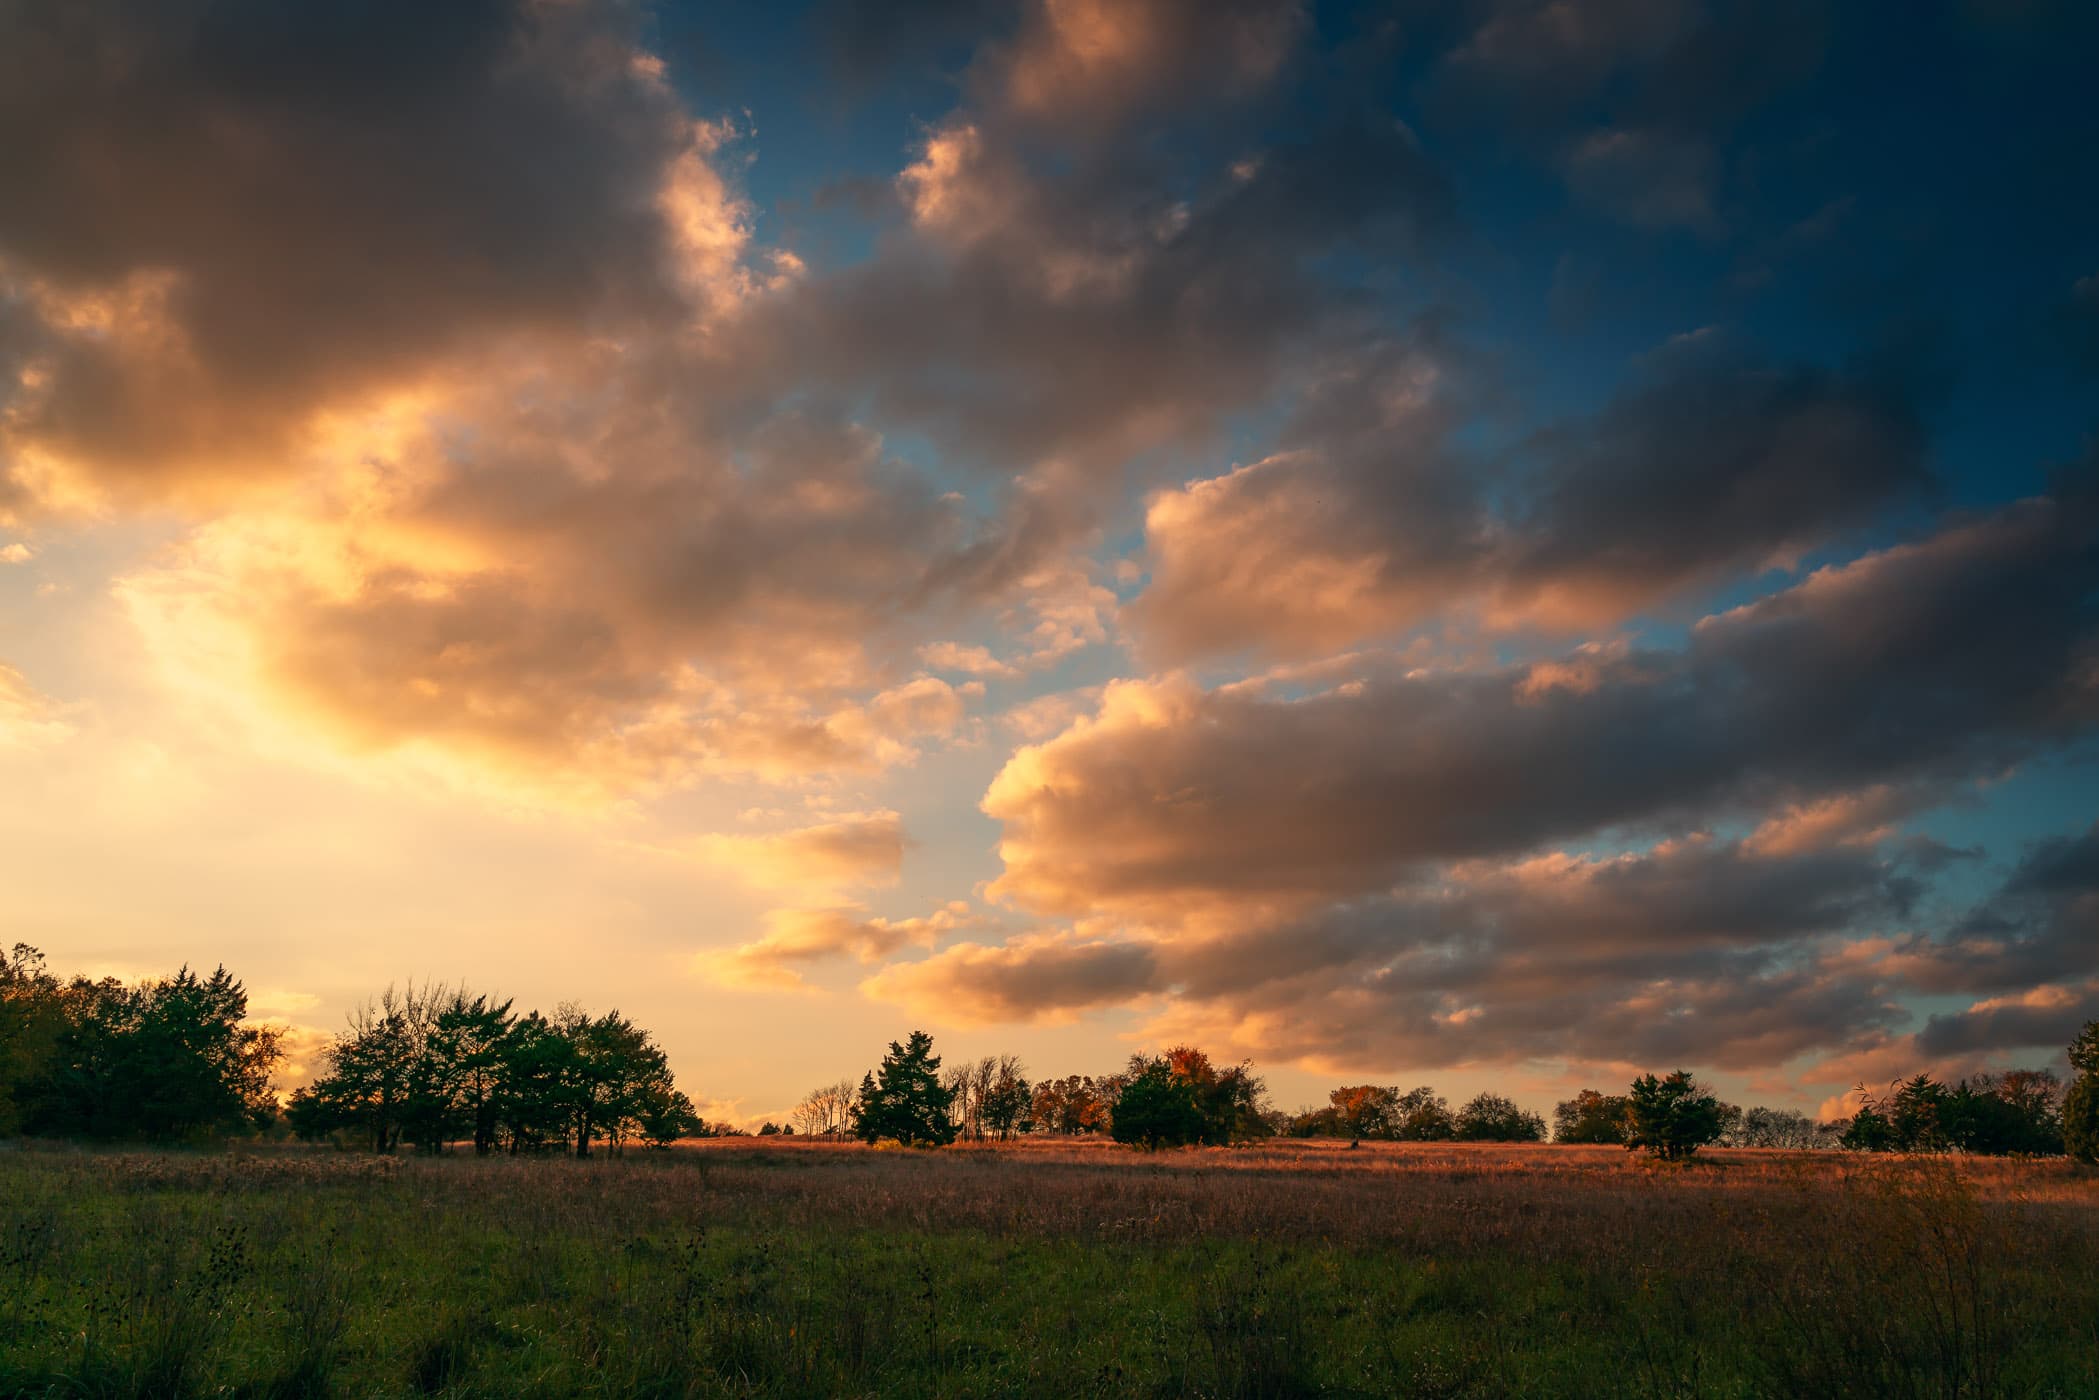 As the day concludes, the sun graces Erwin Park in McKinney, Texas with a breathtaking display of colors, casting a serene glow over the landscape.